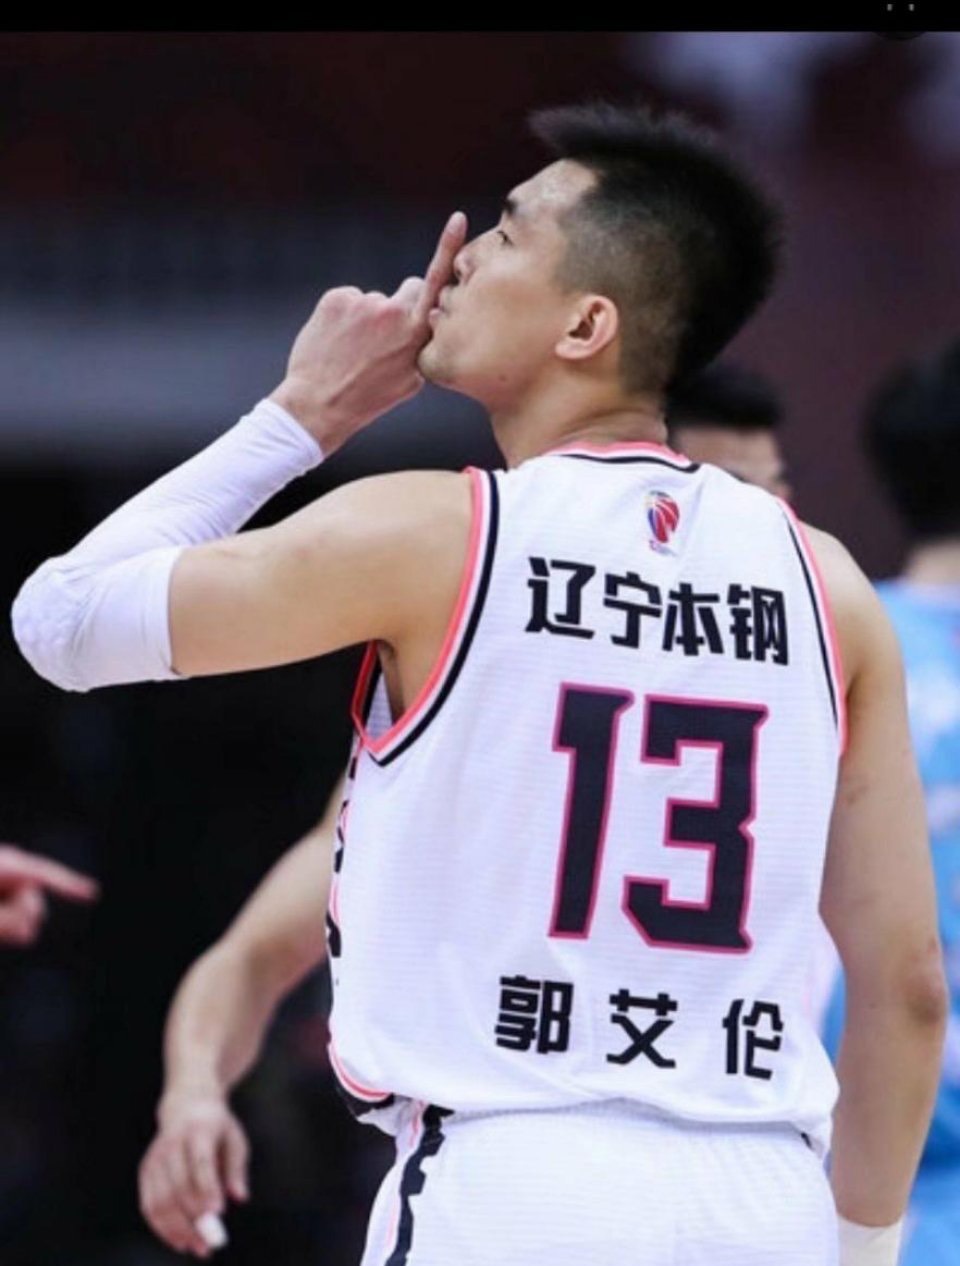 Guo Ailun adds practice to sneer at! The name writes down phonate: He is a ball crazy, install X? You know Guo Ailun far from